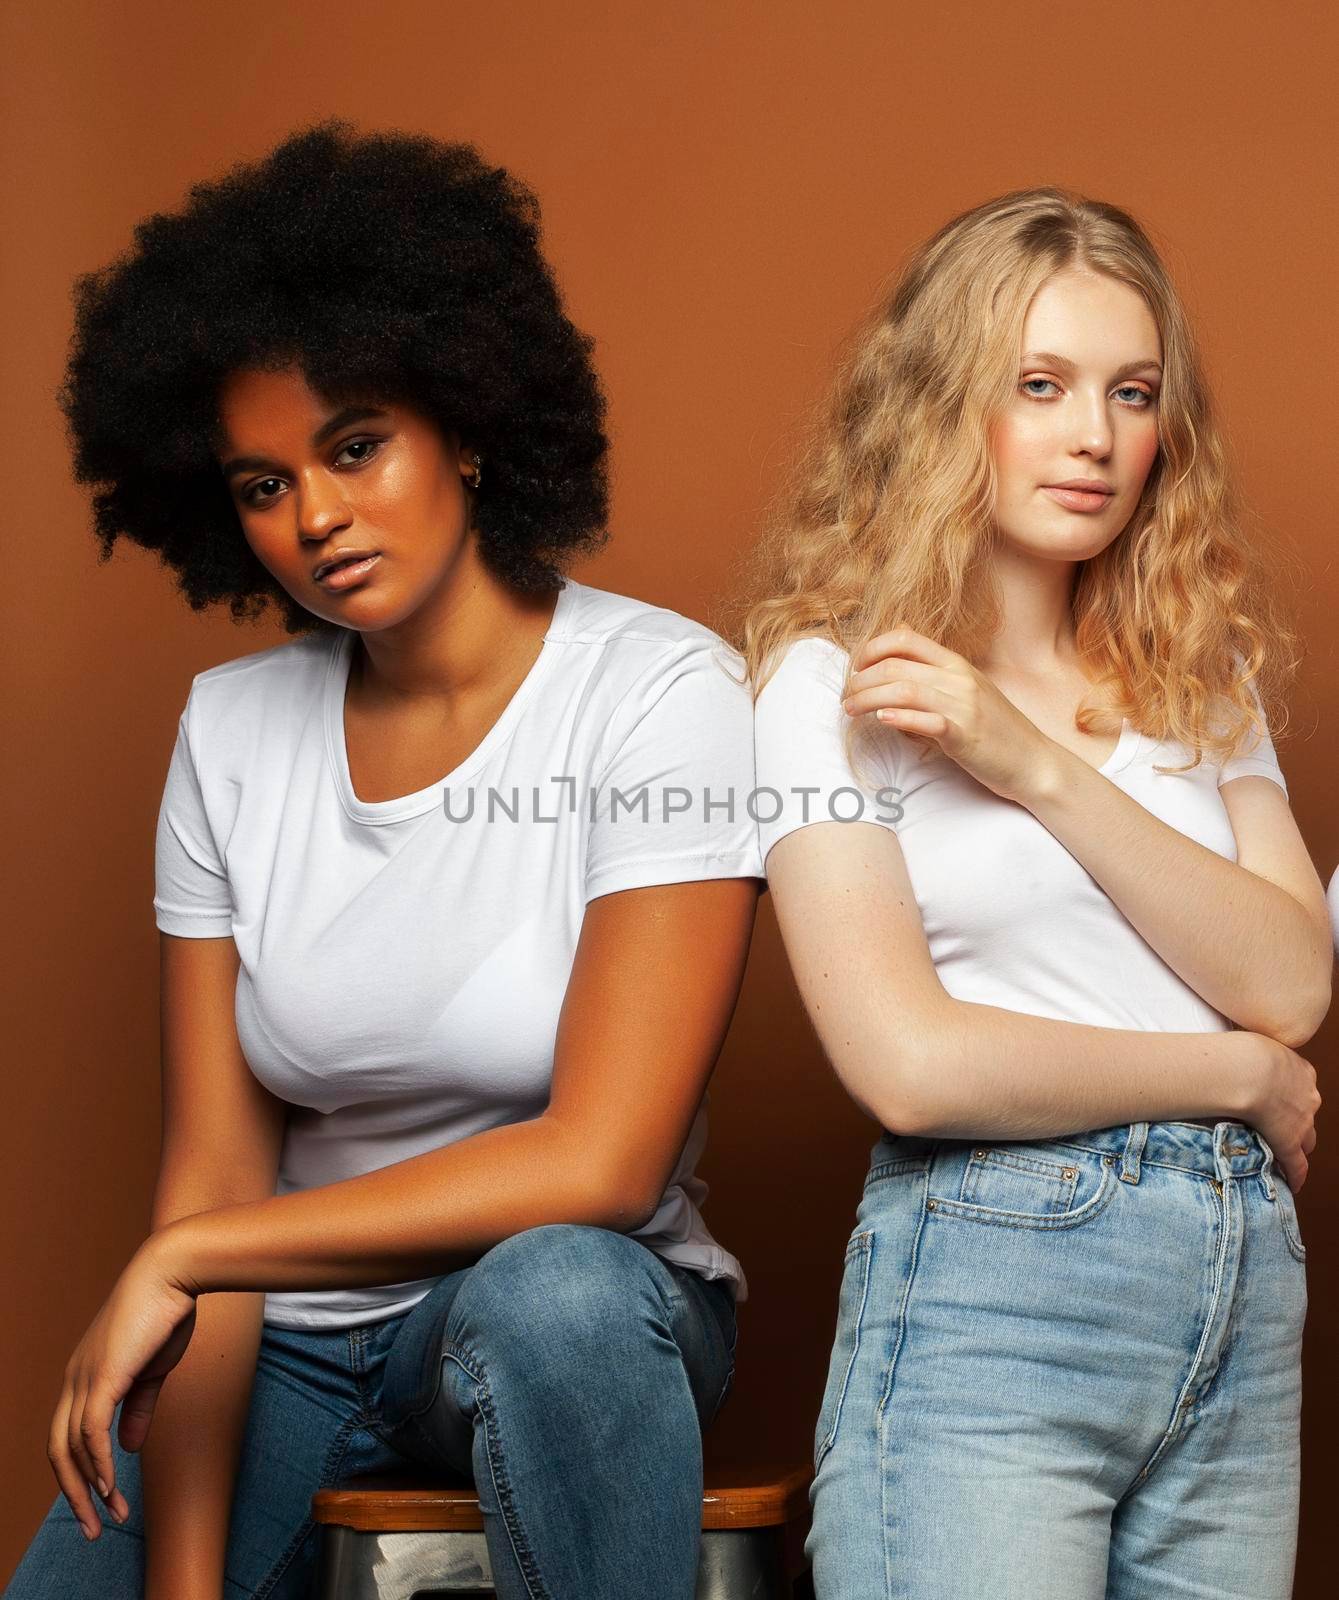 young pretty african and caucasian women posing cheerful together on brown background, lifestyle diverse nationality people concept by JordanJ